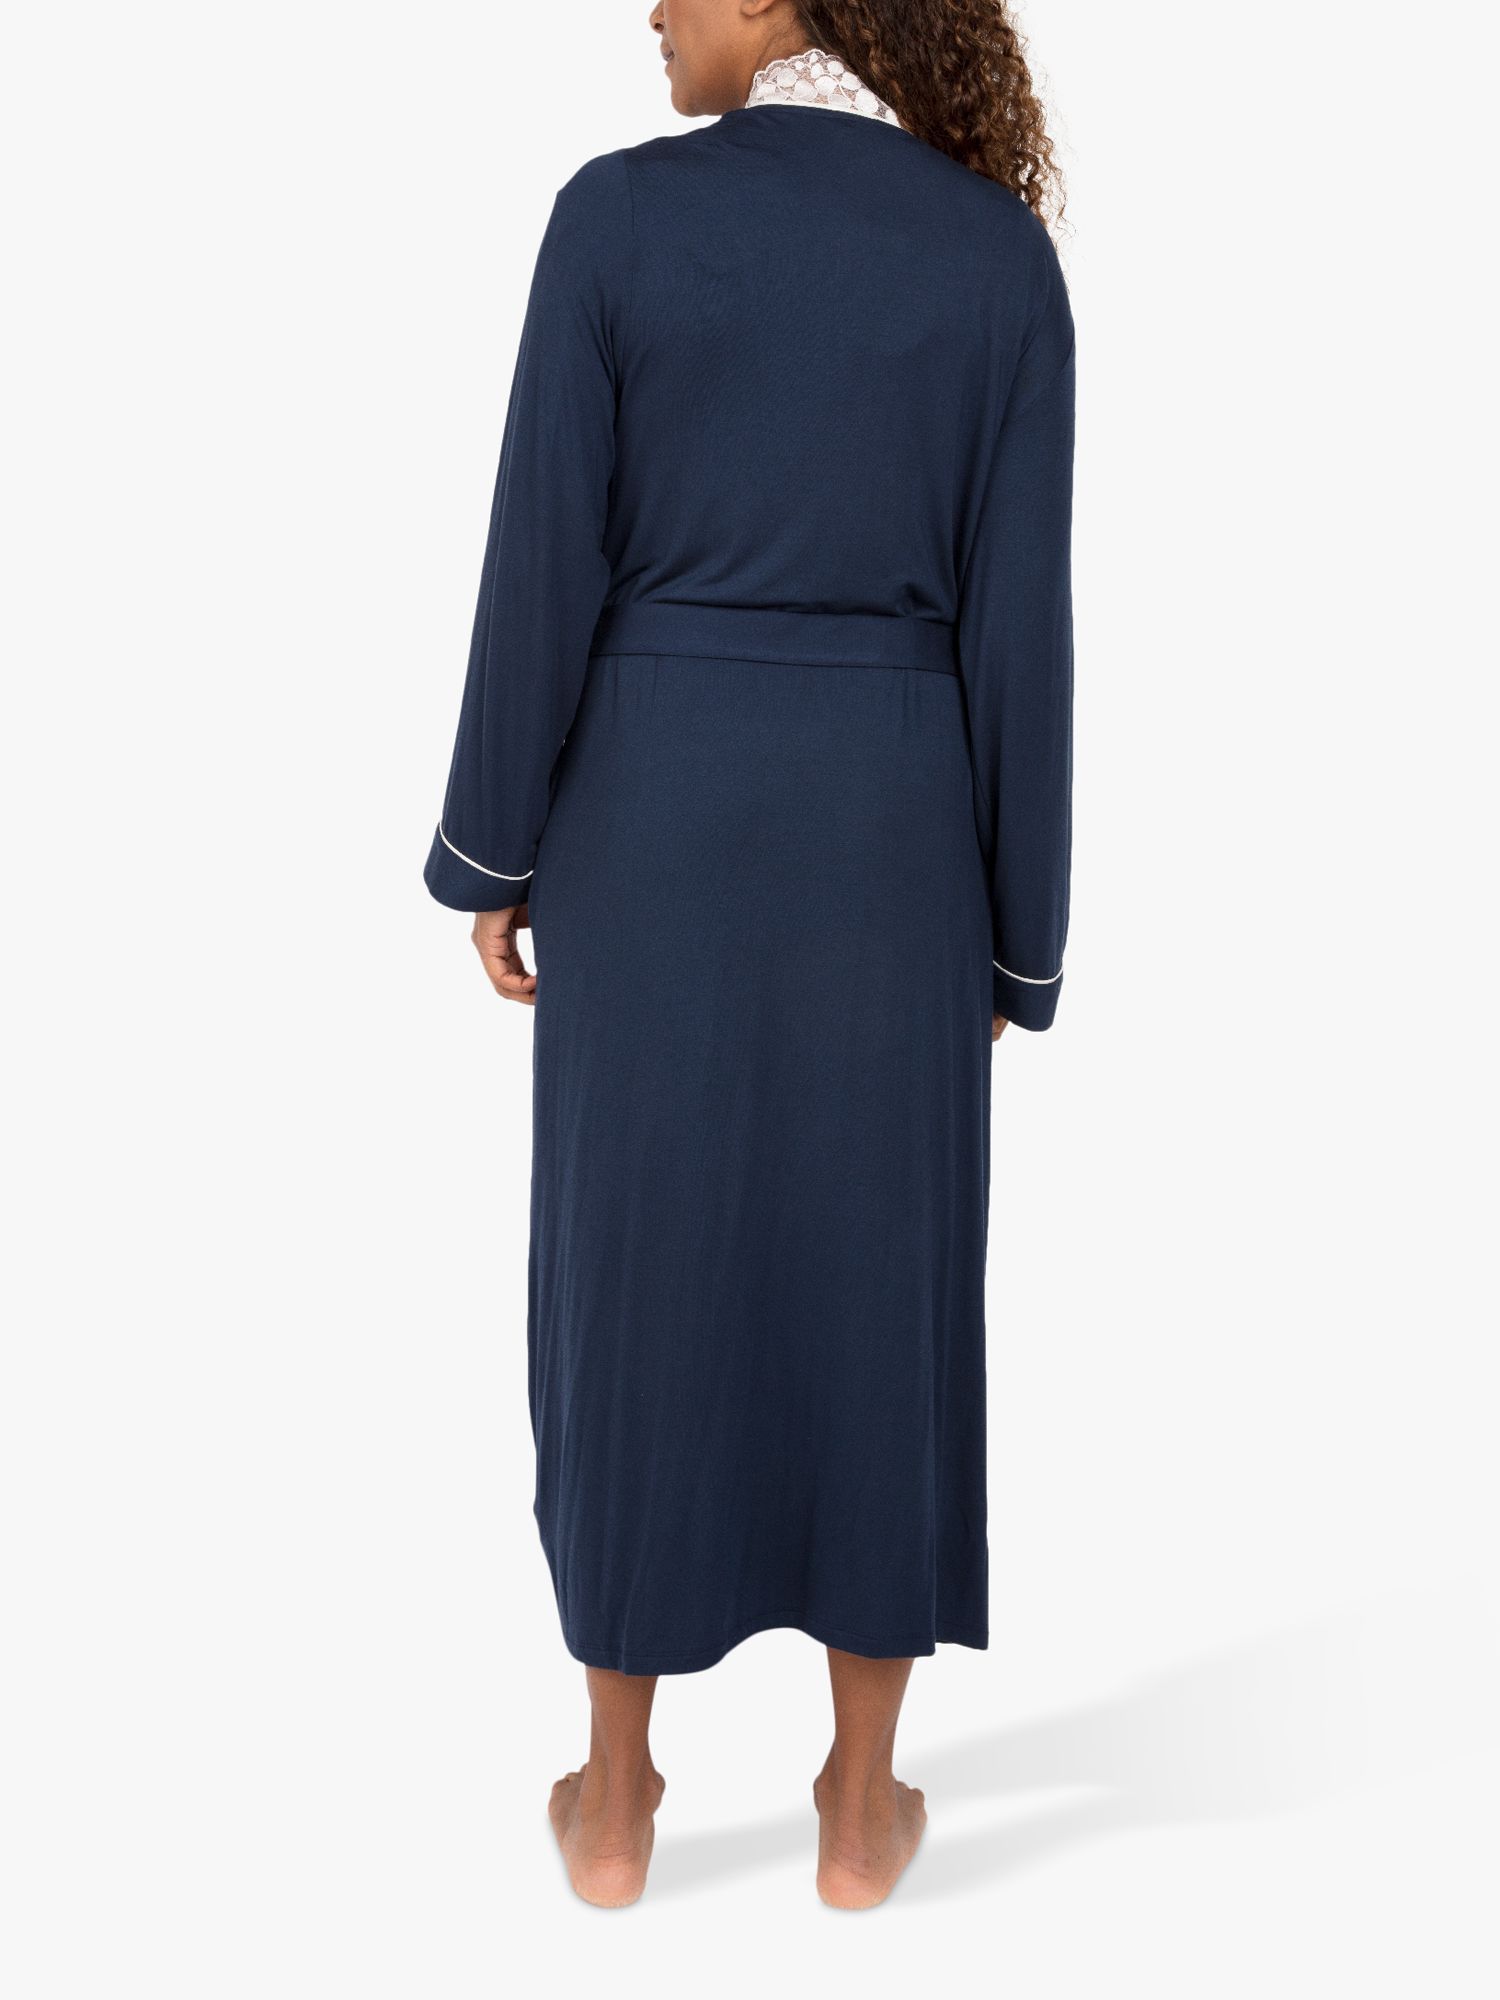 Buy Nora Rose by Cyberjammies Lace Trim Dressing Gown, Navy Online at johnlewis.com